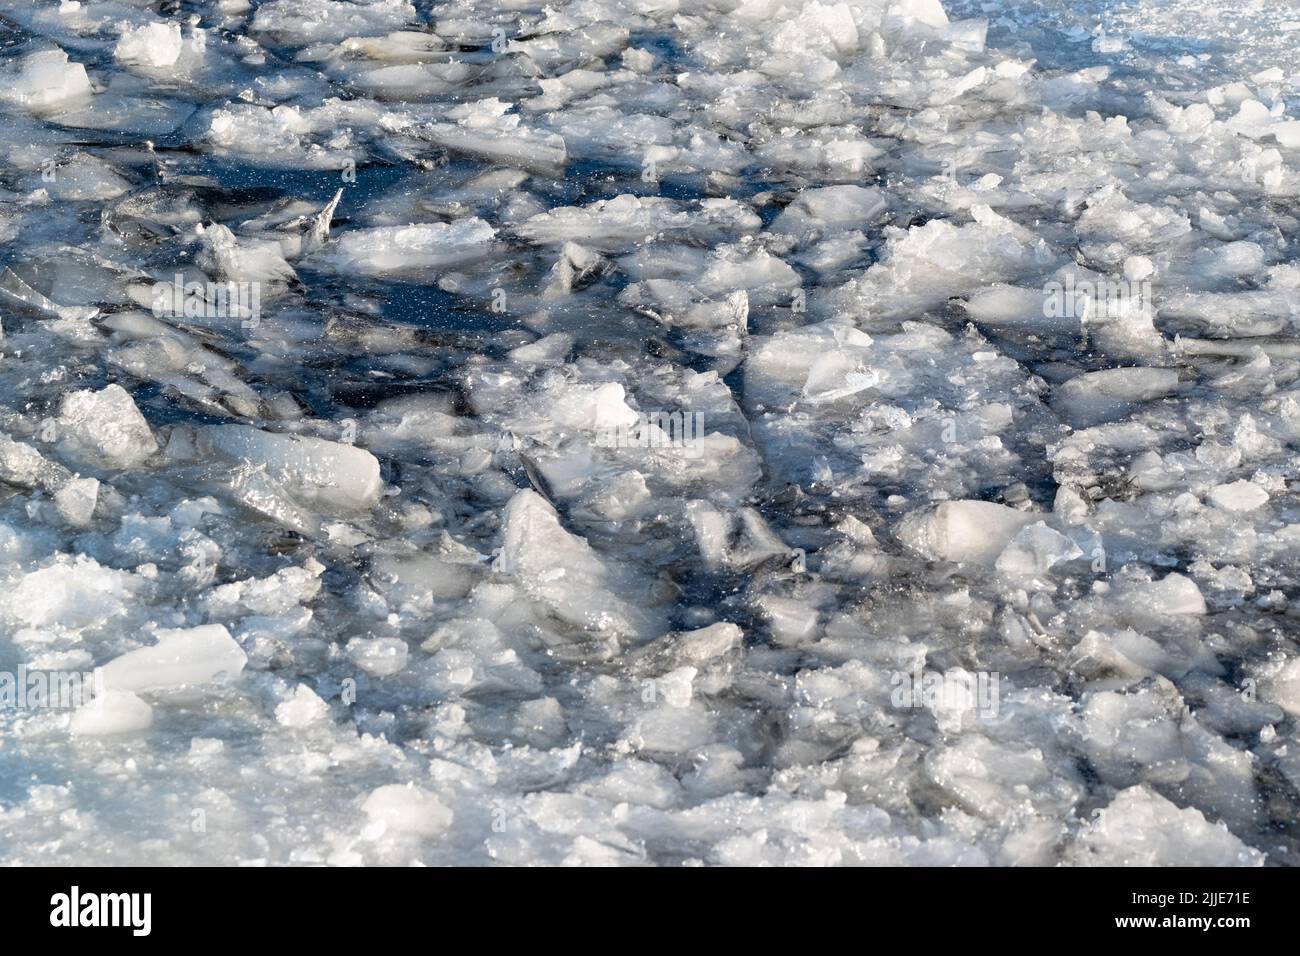 Cracked ice pieces on the frozen water surface in a cold winter day. Stock Photo